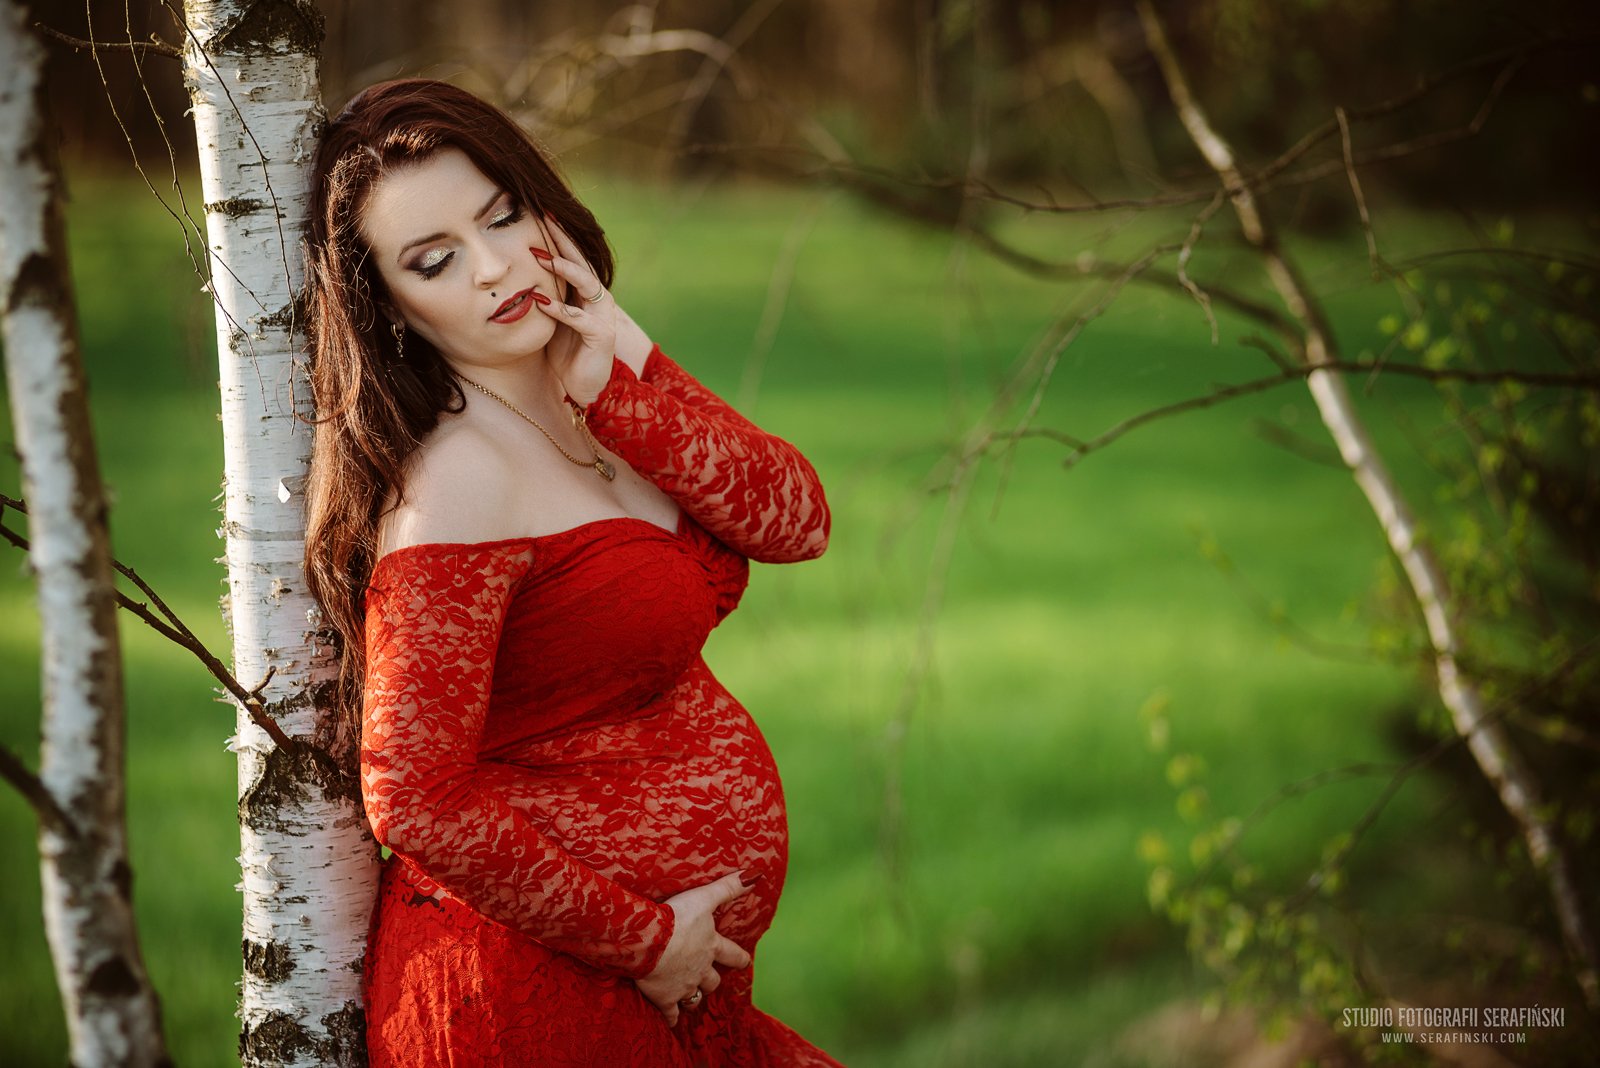 pregnancy, pregnant, woman, maternity, belly, people, female, mother, happy, motherhood, love, life, baby, tummy, maternal, abdomen, awaiting, new, beautiful, family, expectation, concept, white, healthy, child, Krzysztof Serafiński